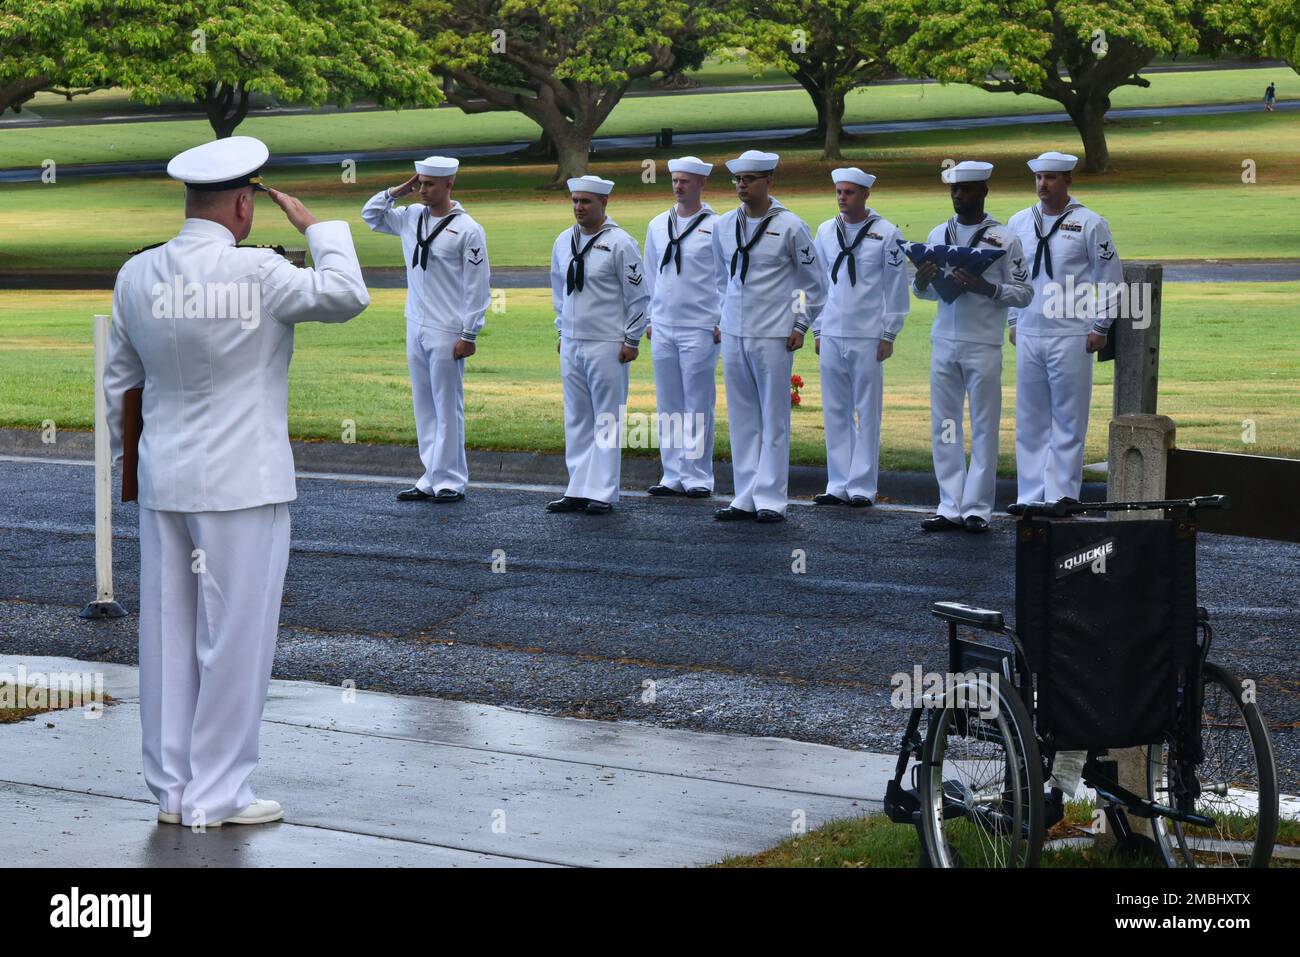 Sailors assigned to U.S. Navy Region Hawaii conduct an internment ceremony for U.S. Navy Machinist's Mate 2nd Class Everett Raymond Stewart, of California, at the National Memorial Cemetery of the Pacific, Honolulu, Hawaii, June 16, 2022. Stewart was assigned to the USS Oklahoma, which sustained fire from Japanese aircraft and multiple torpedo hits causing the ship to capsize and resulted in the deaths of more than 400 crew members on Dec. 7, 1941, at Ford Island, Pearl Harbor. Stewart was recently identified through DNA analysis by the Defense POW/MIA Accounting Agency (DPAA) forensic laborat Stock Photo